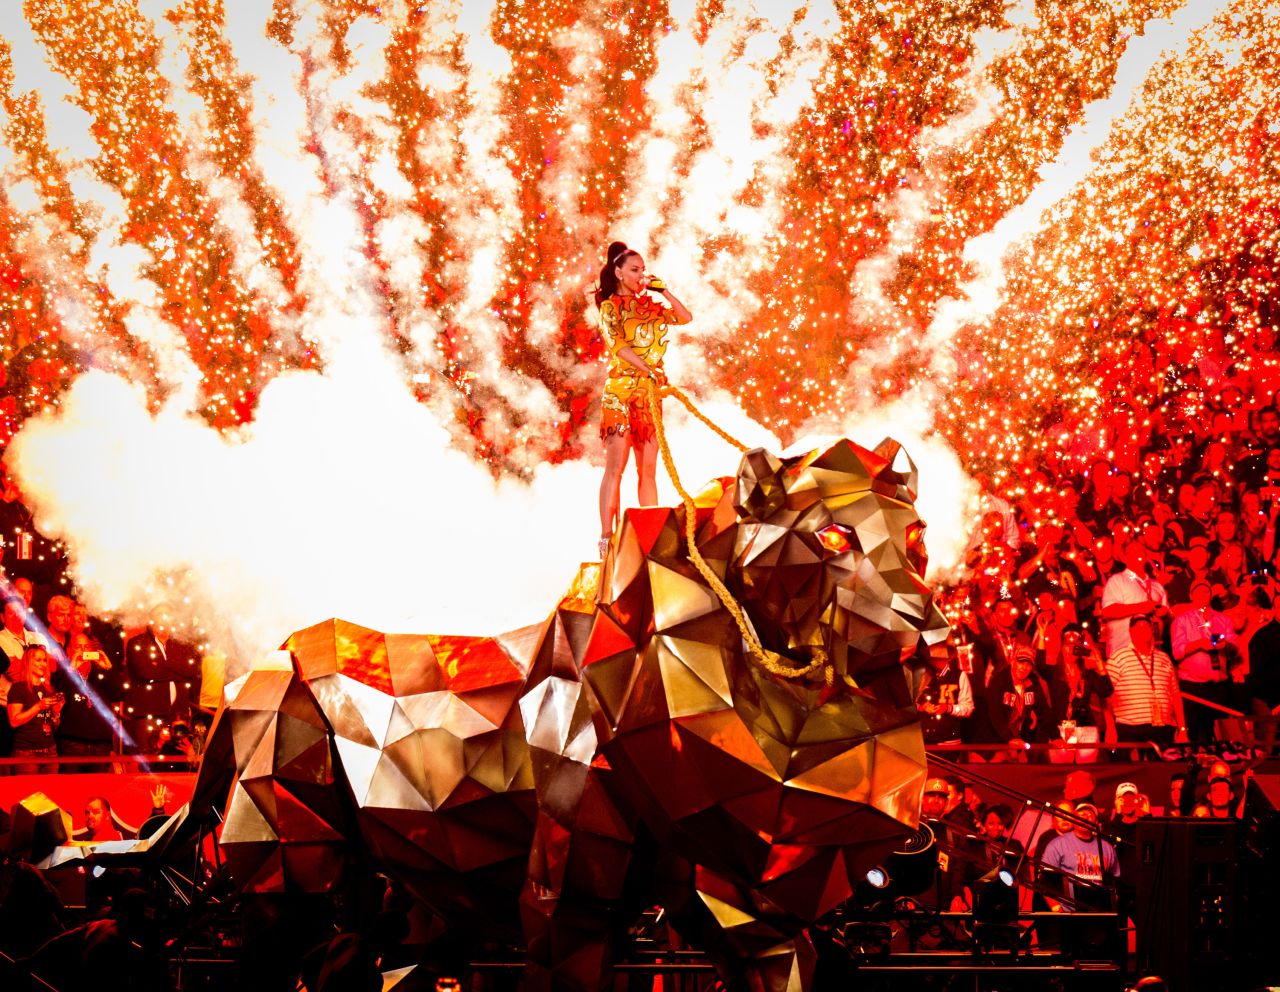 Perry performs at the Super Bowl XLIX halftime show in Glendale, Arizona, in February.